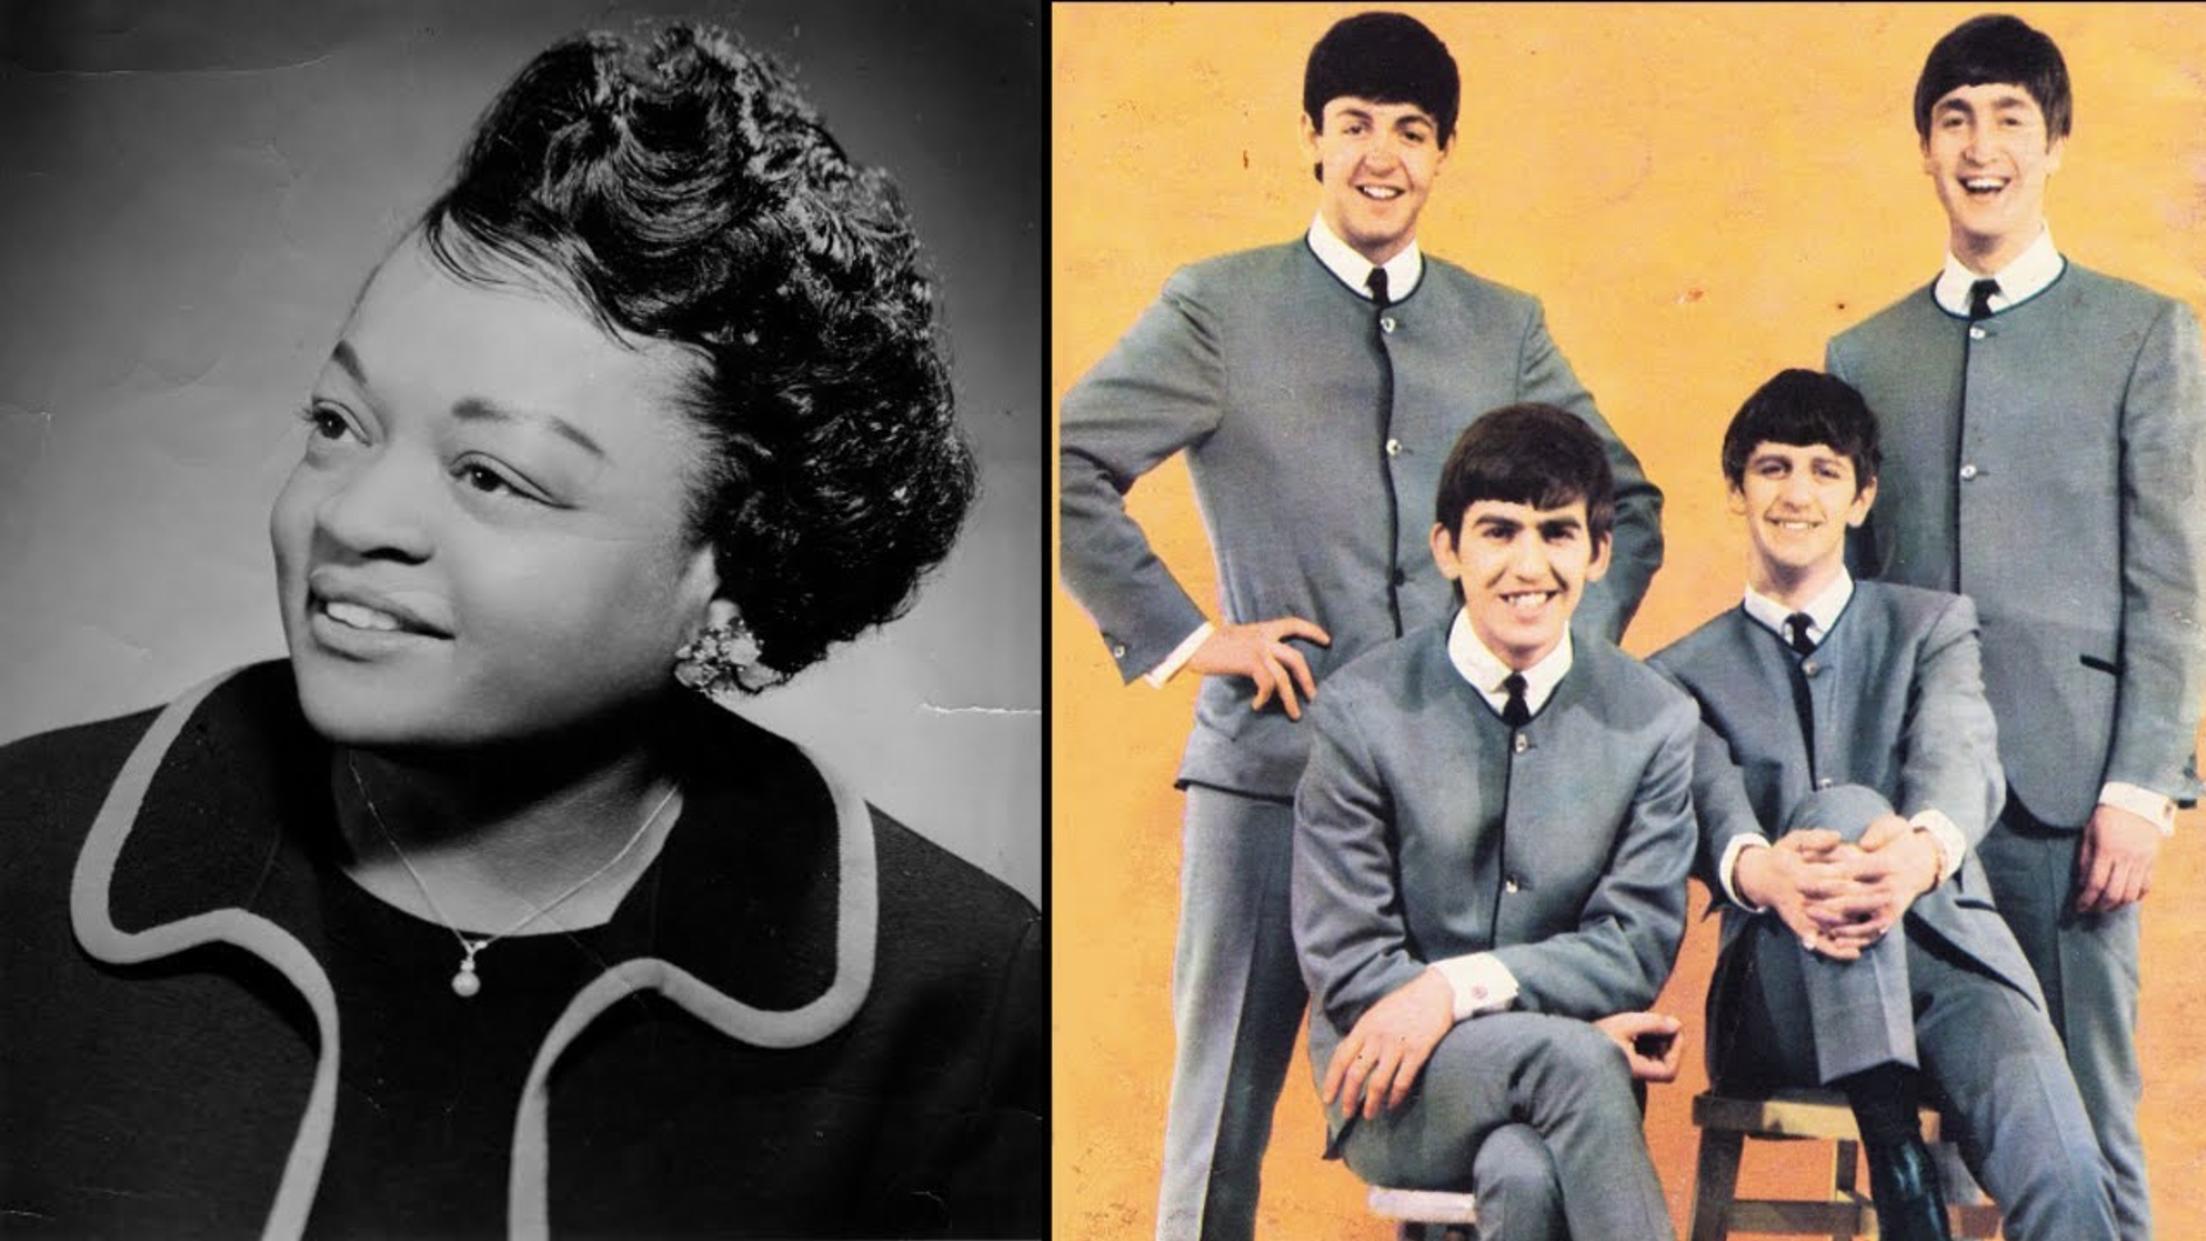 Black Woman Discovered the Beatles | Vivian Carter, Vee Jay Records Story  | Black History